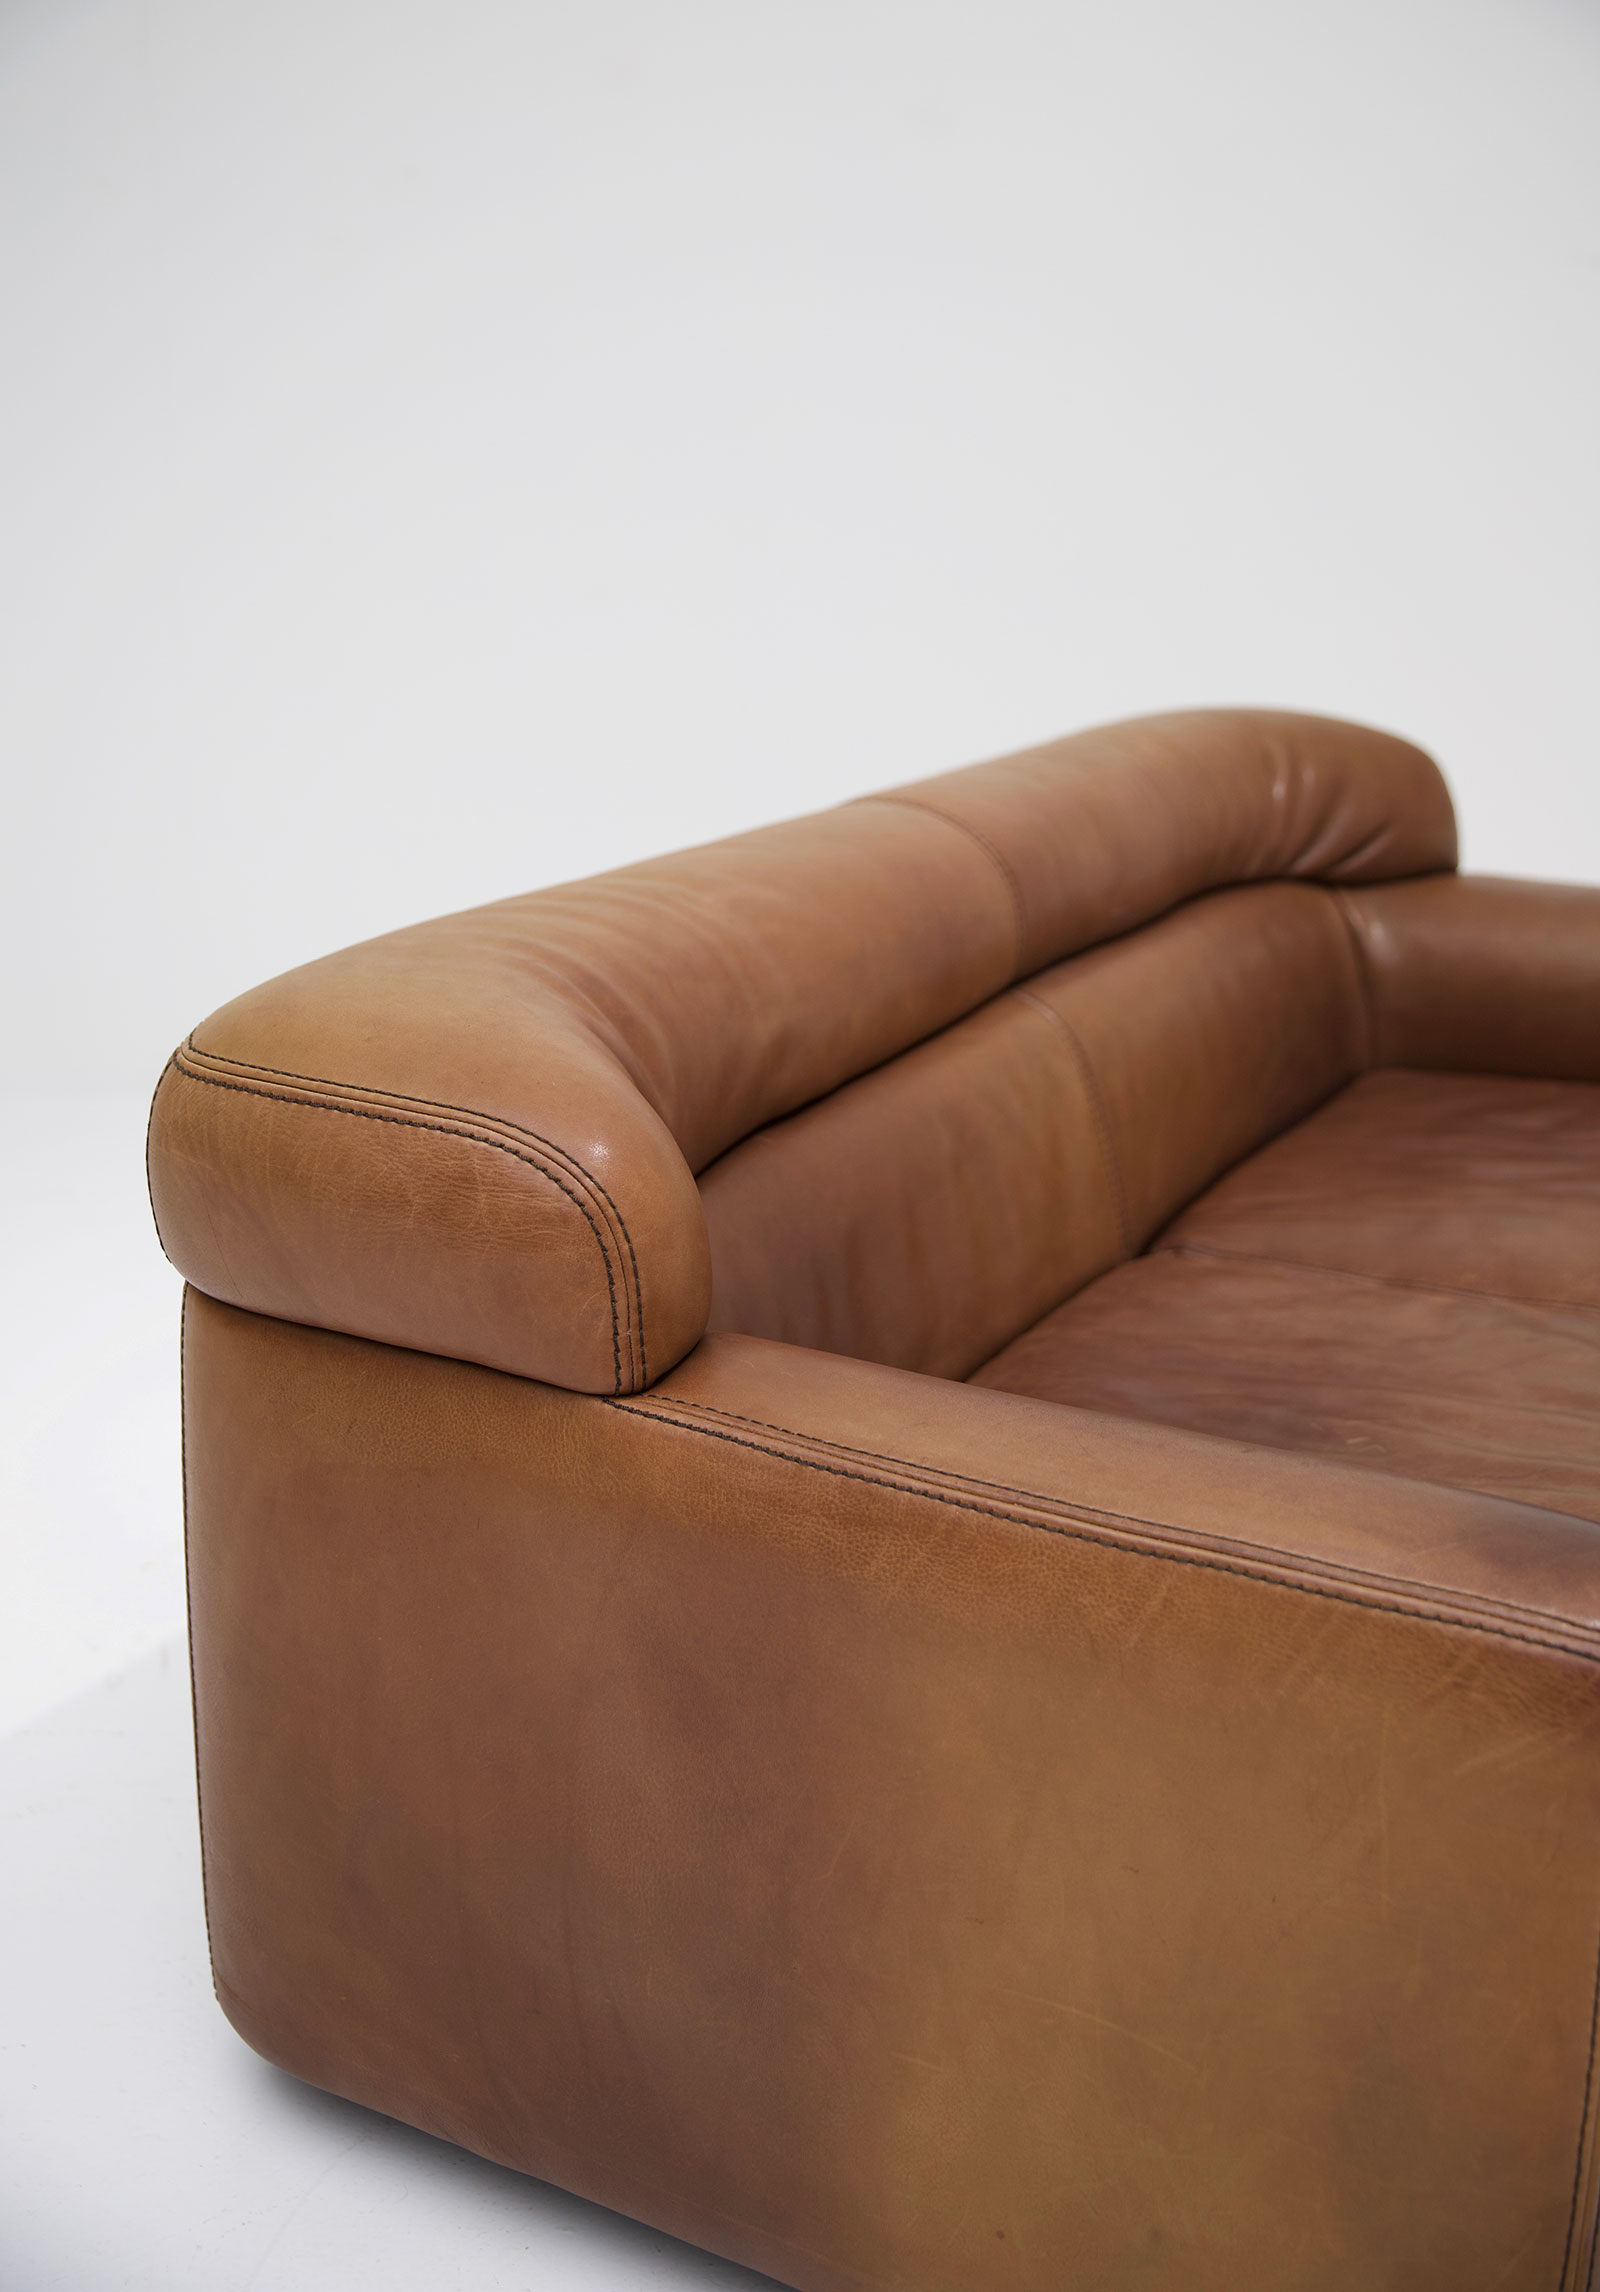 durlet leather two seat sofaimage 5